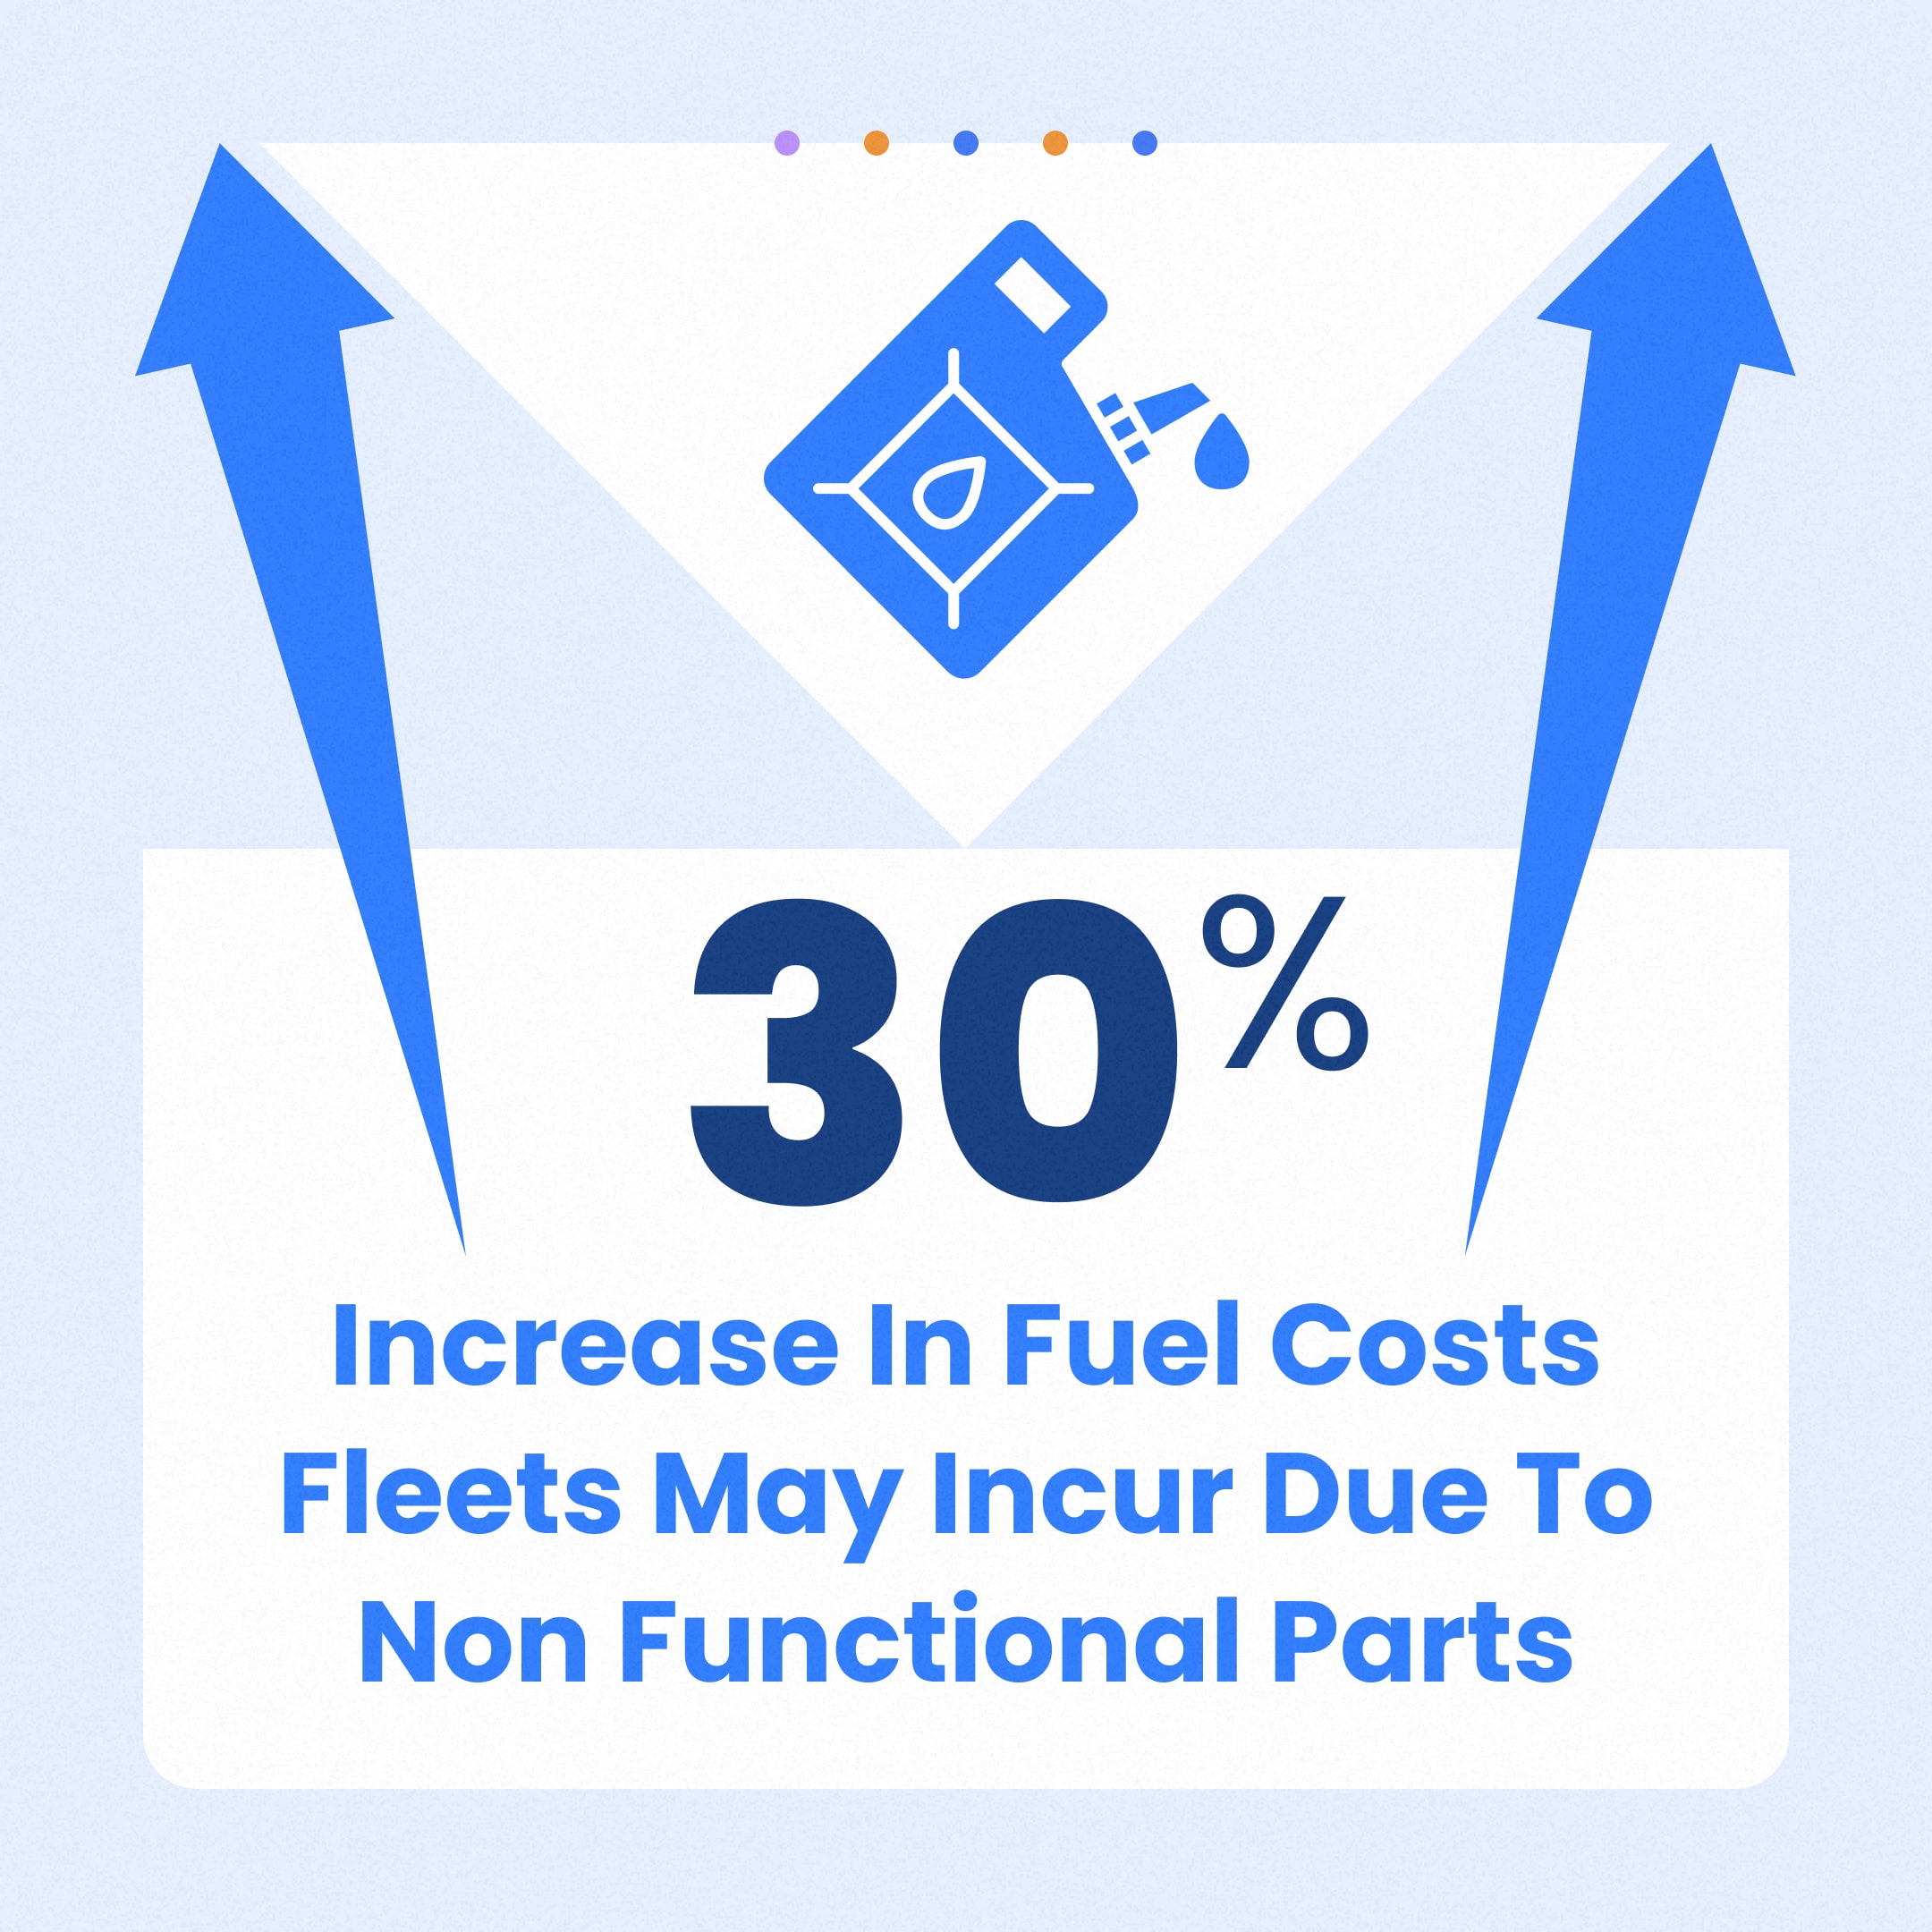 30 increase in fuel costs fleets may incur due to non functional parts